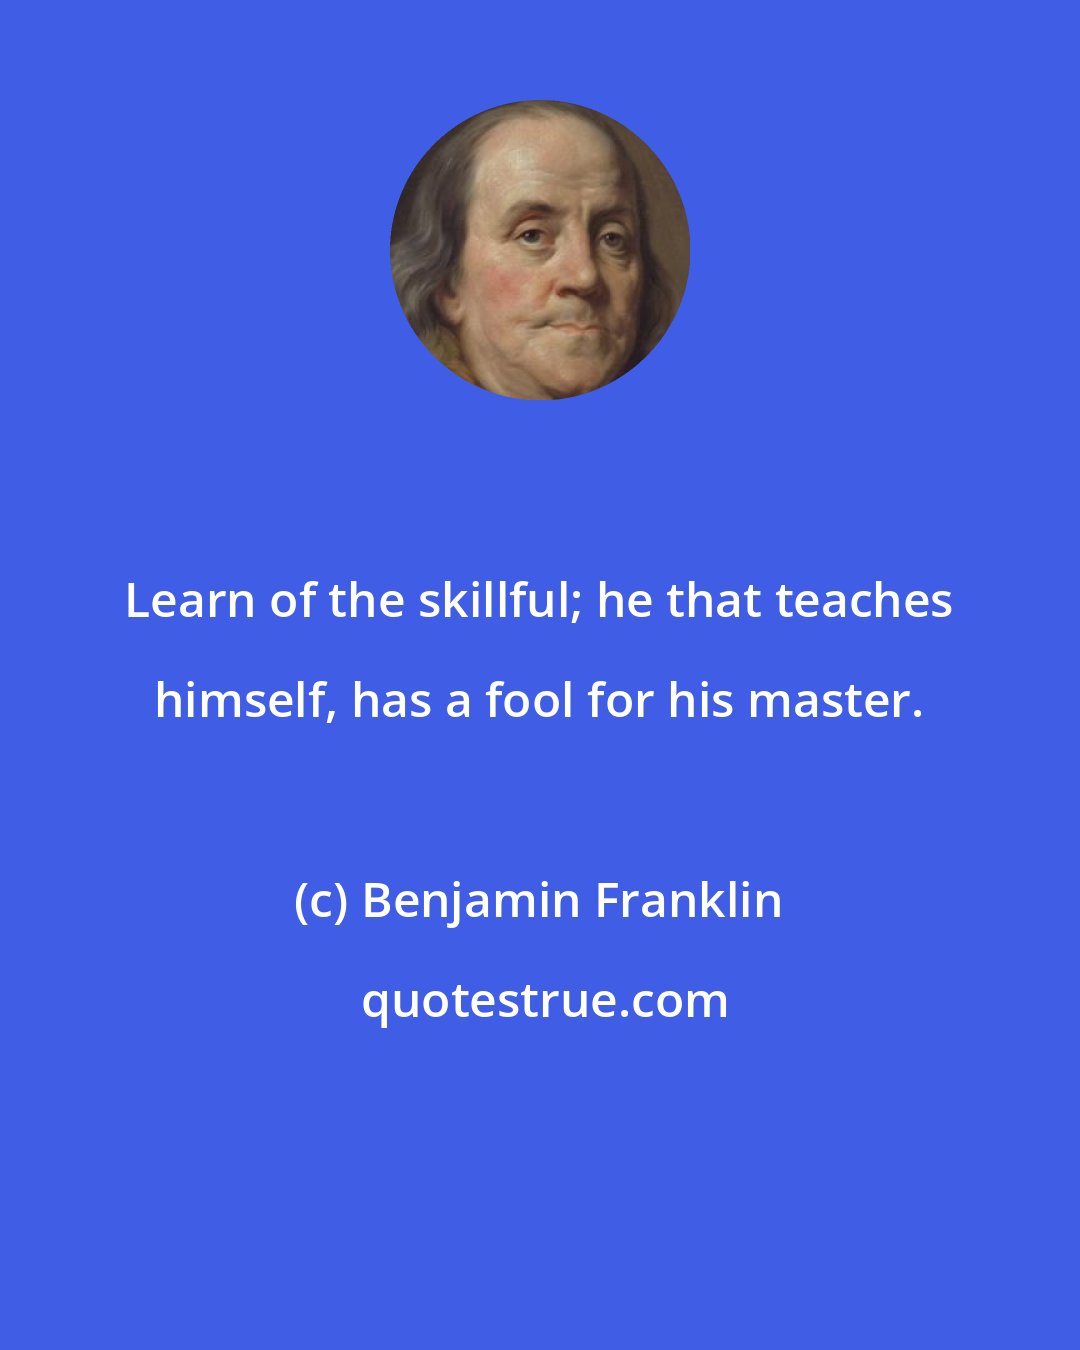 Benjamin Franklin: Learn of the skillful; he that teaches himself, has a fool for his master.